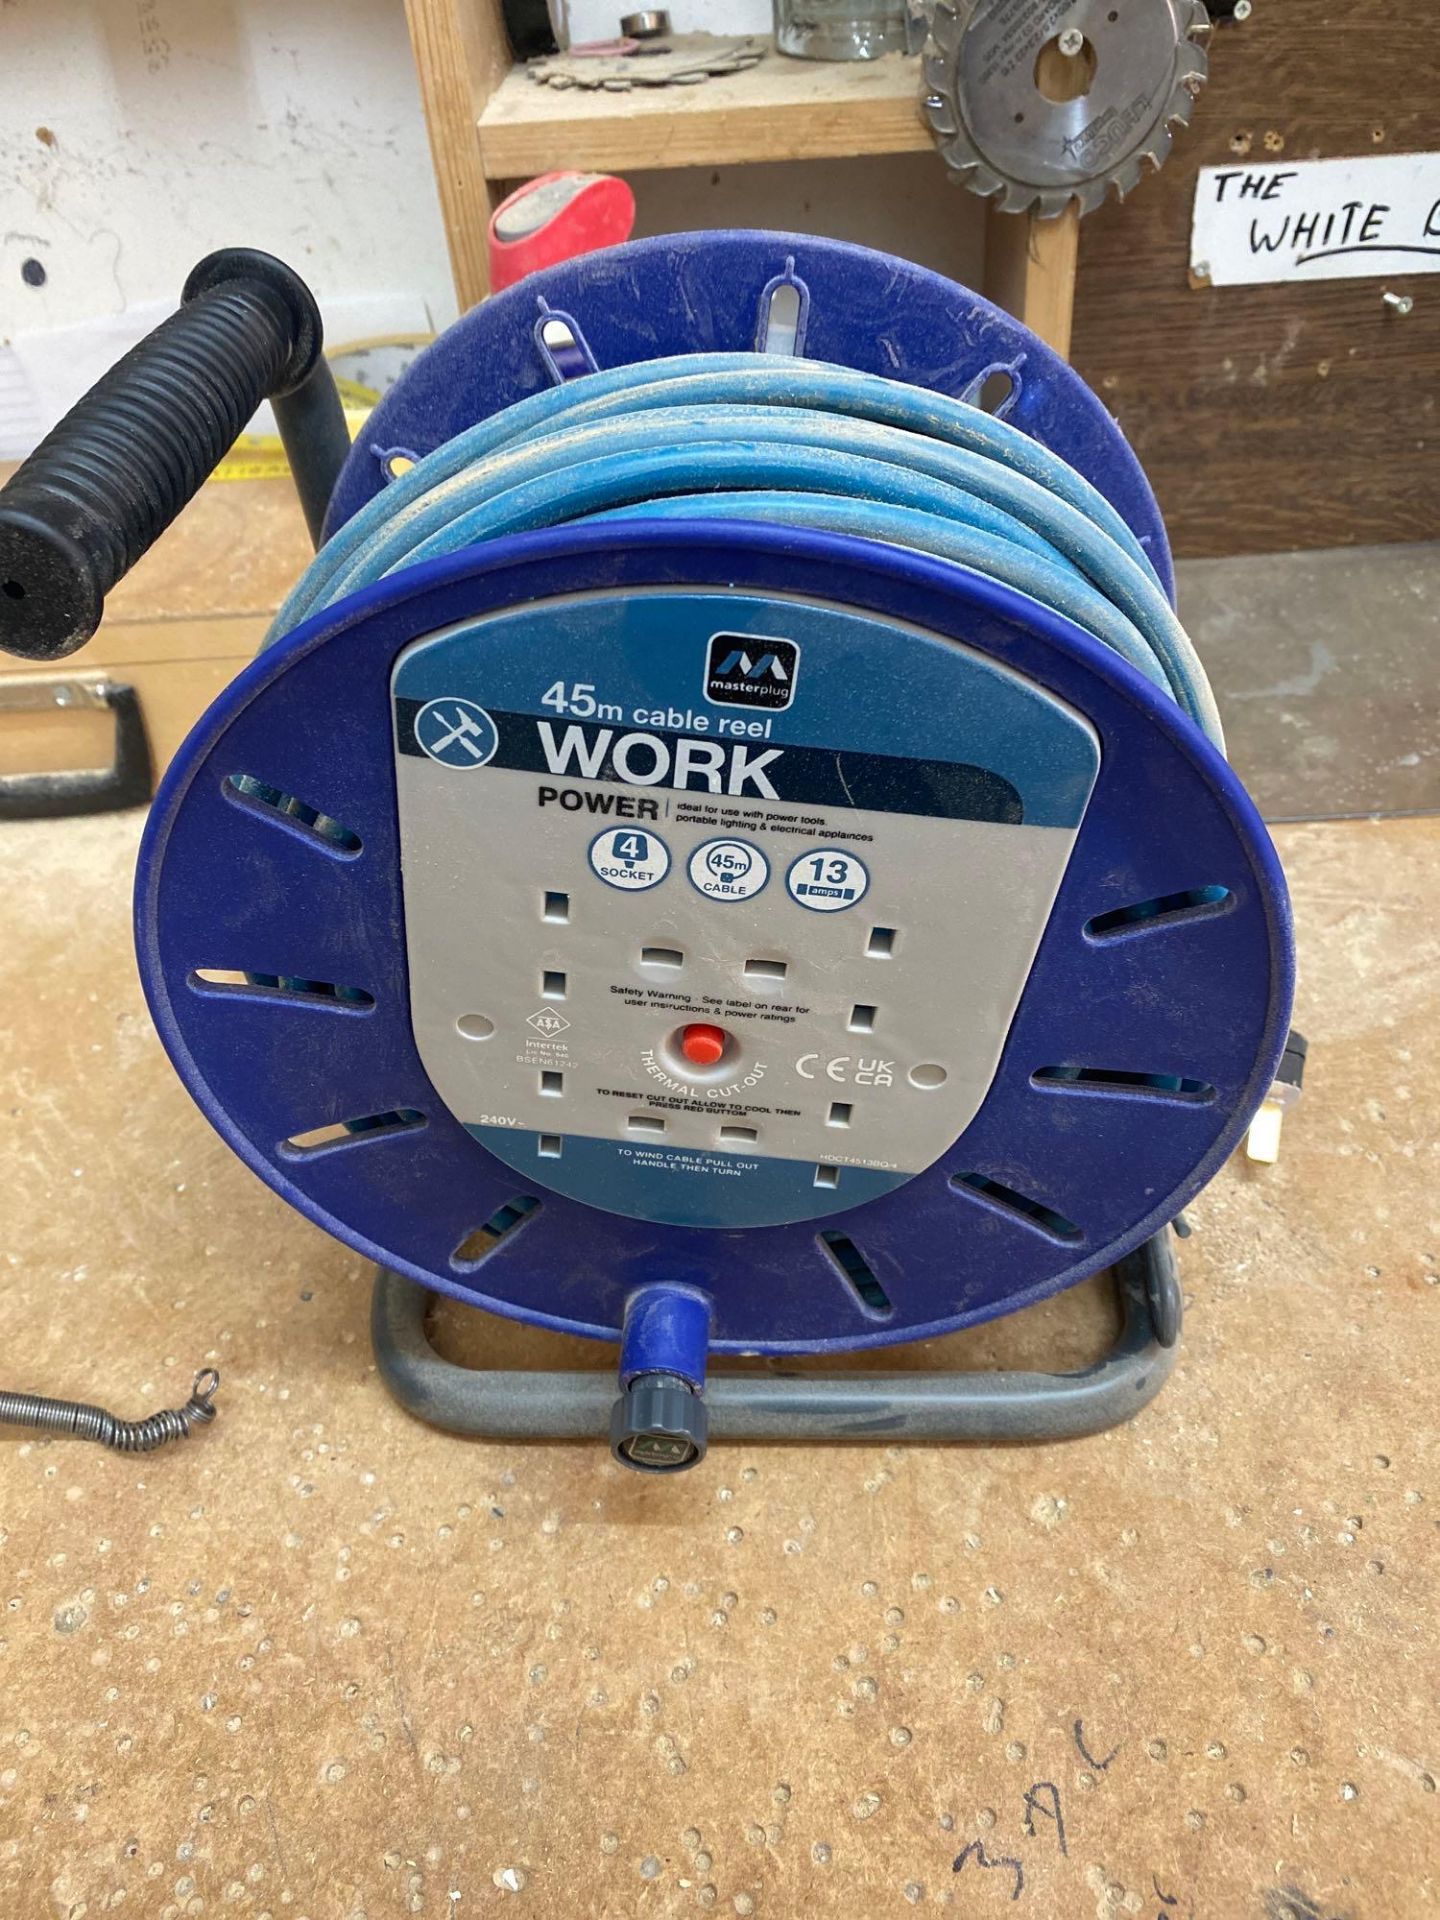 Work 45m cable reel